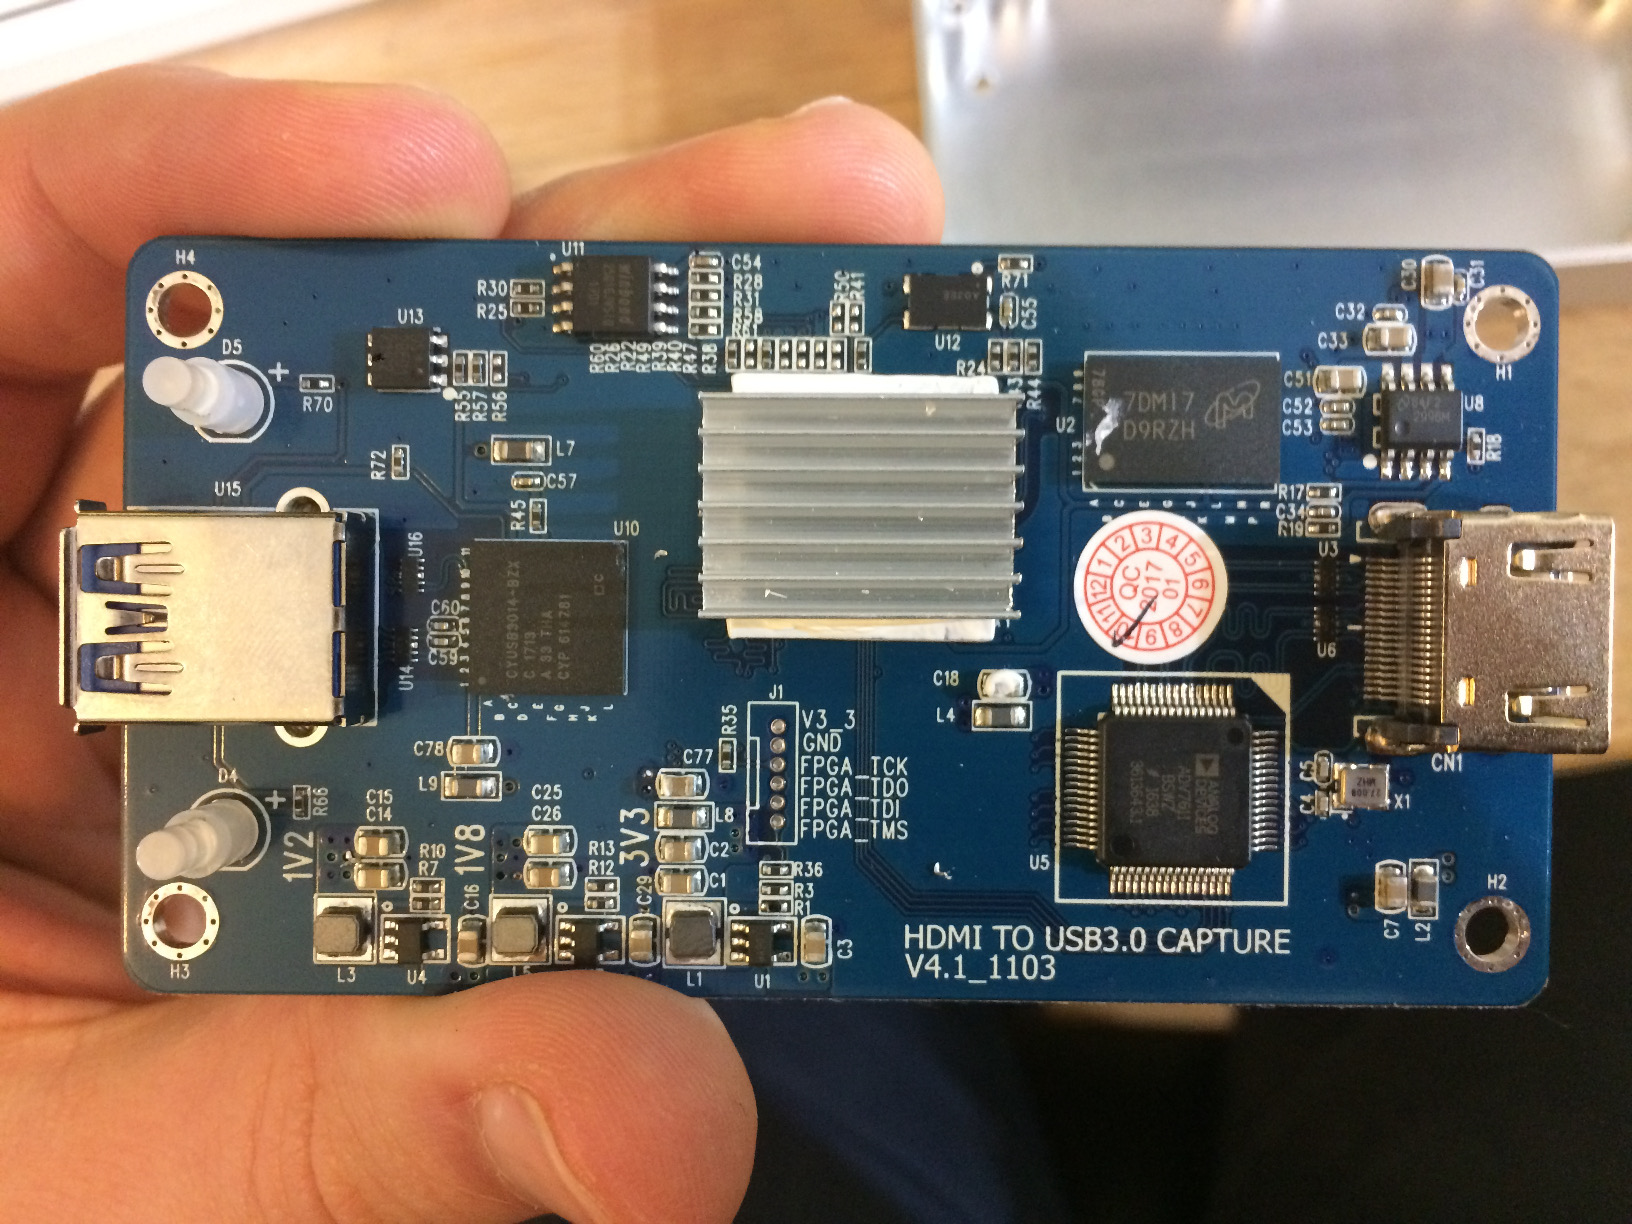 Circuit board of the hdmi to USB 3.0 capture card